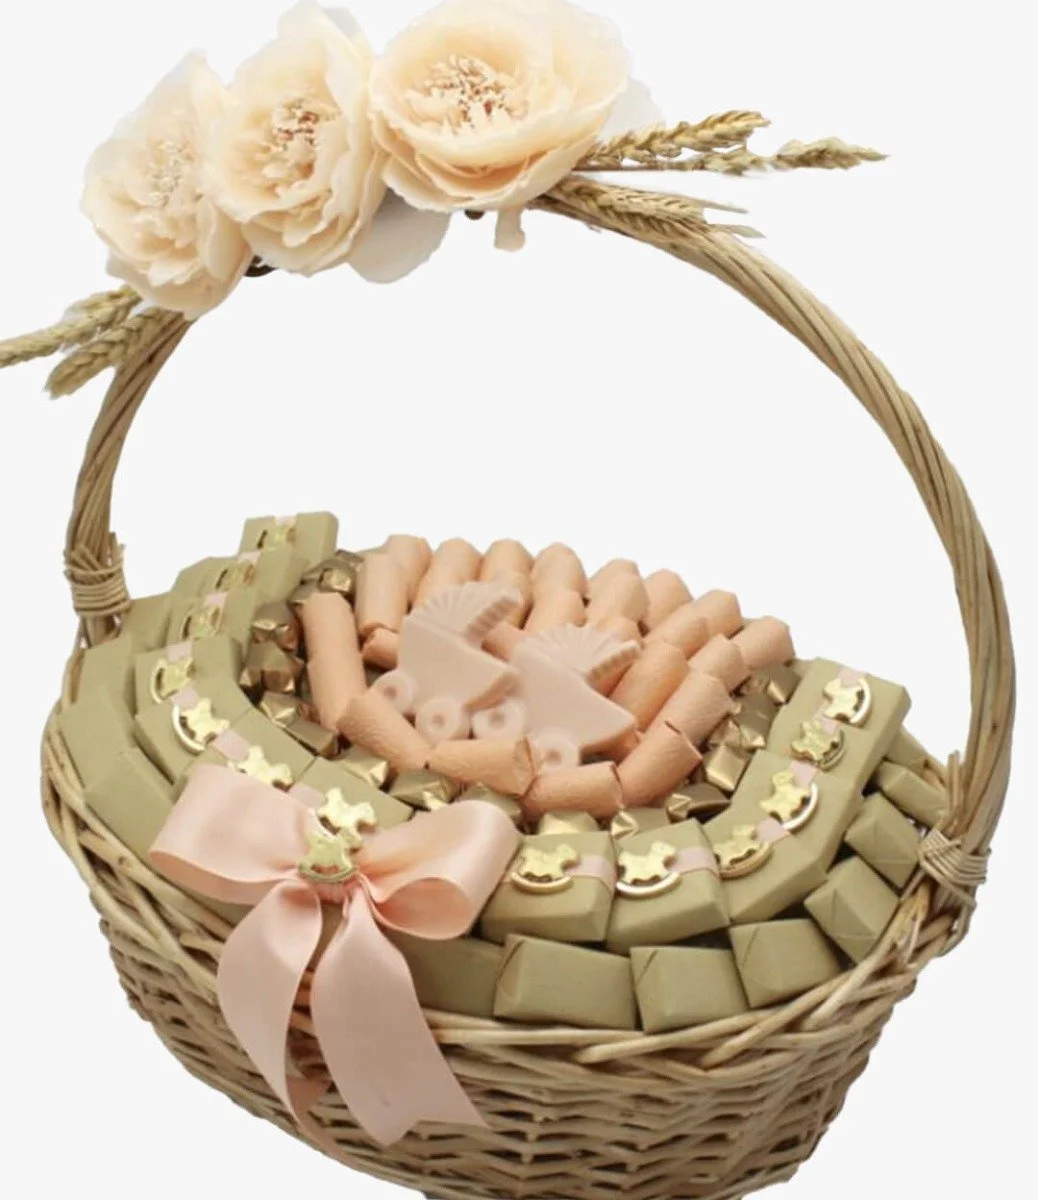 Baby Girl Floral Rocking Horse Decoraetd Chocolate Basket By Le Chocolatier